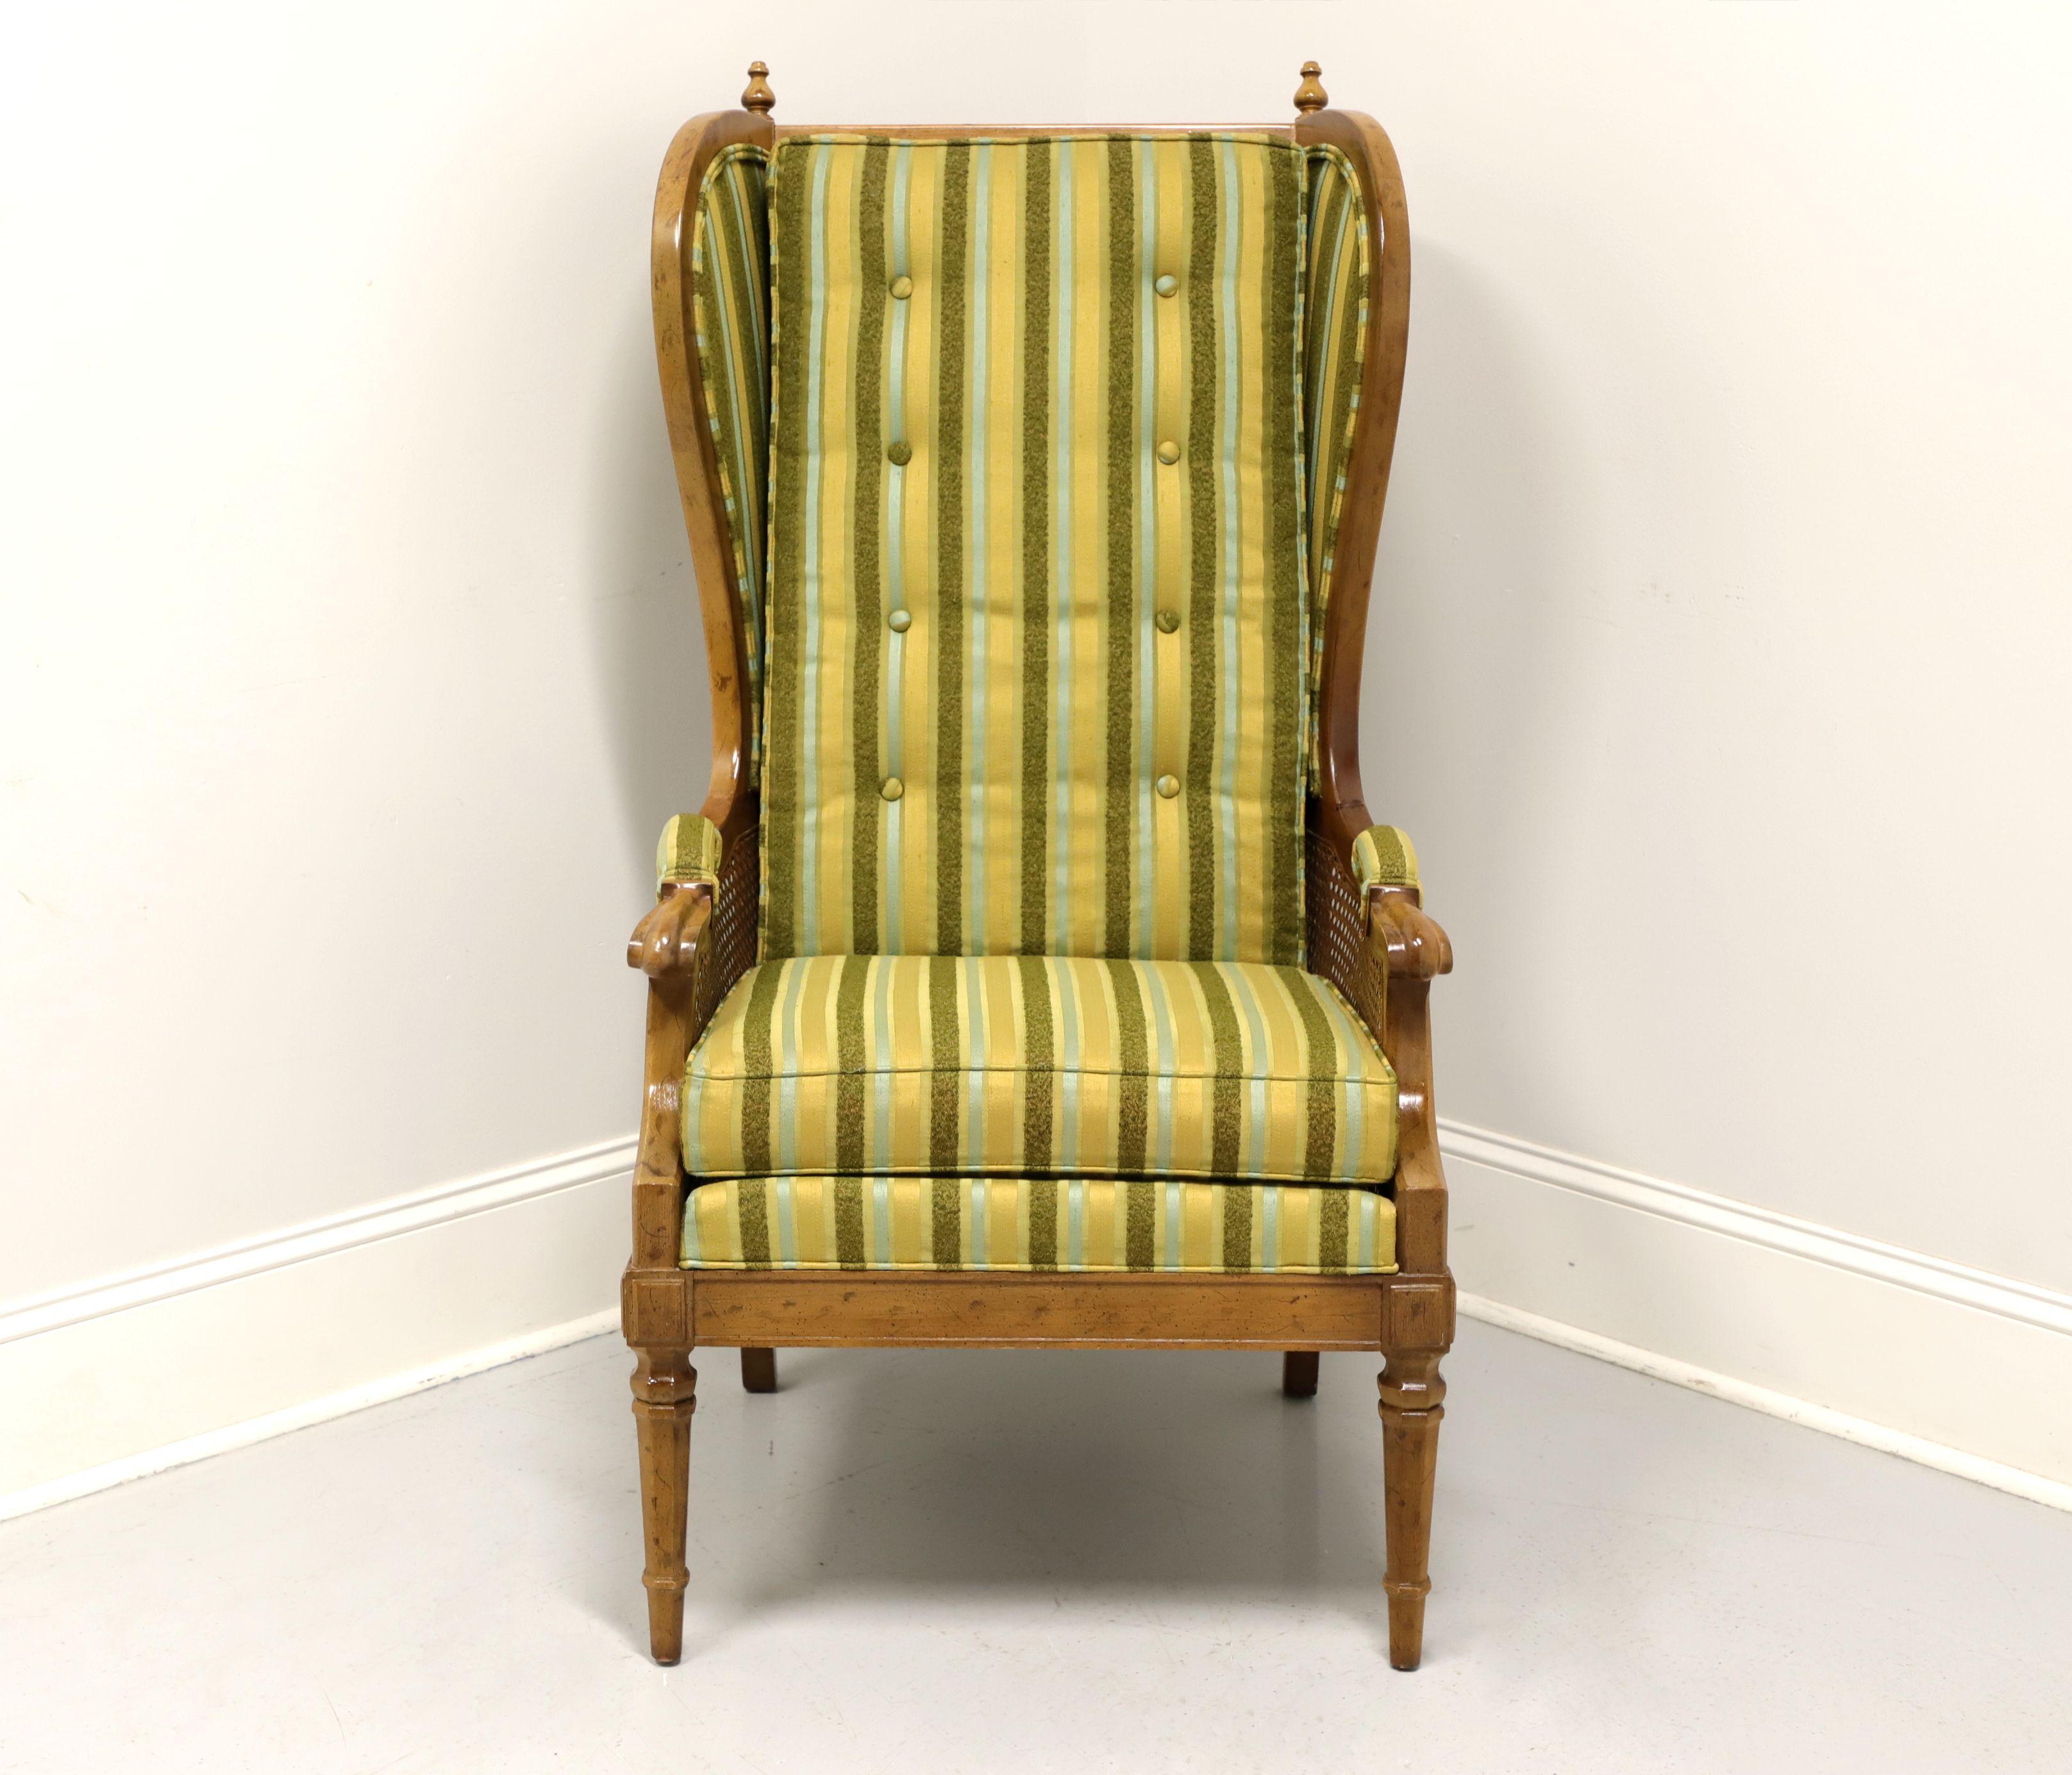 A Spanish style wing back chair by Drexel, from their Velero Collection. Pecan with a distressed finish, finials to crest rail, upholstered arm rests, cane to sides of arms and round tapered front legs. Green, gold, lime green and teal color striped